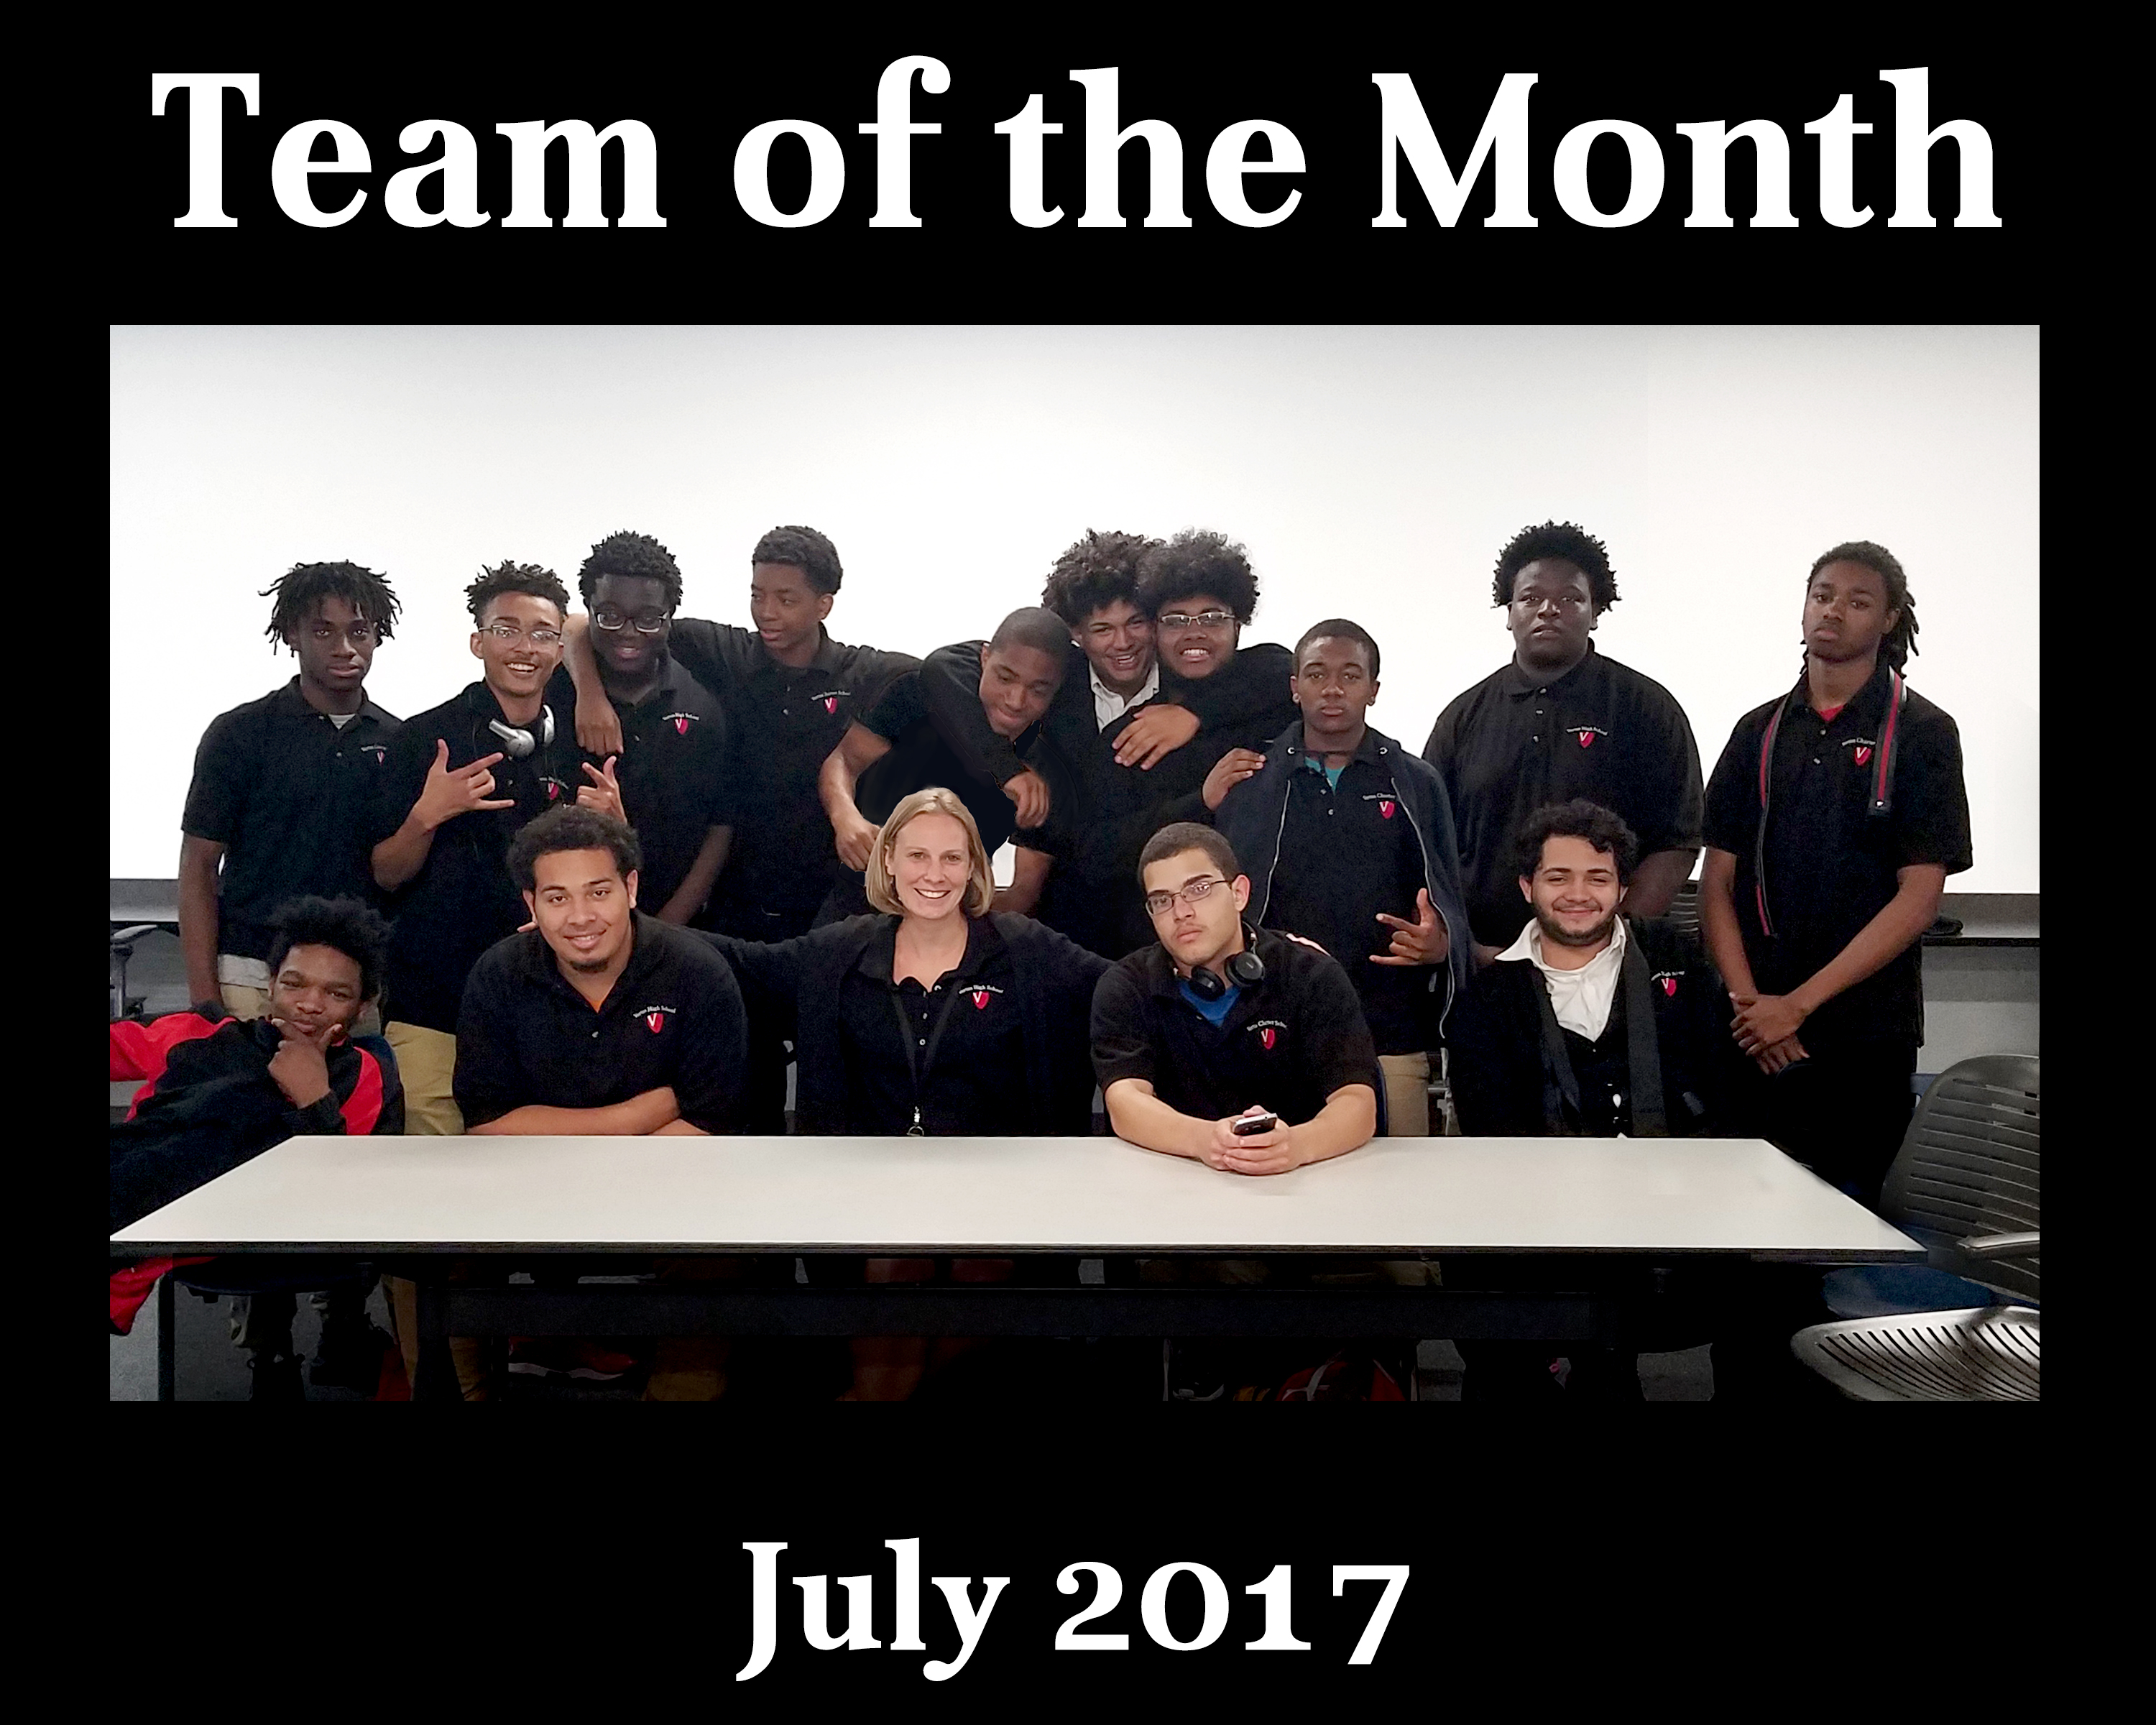 Team of the Month - July 2017